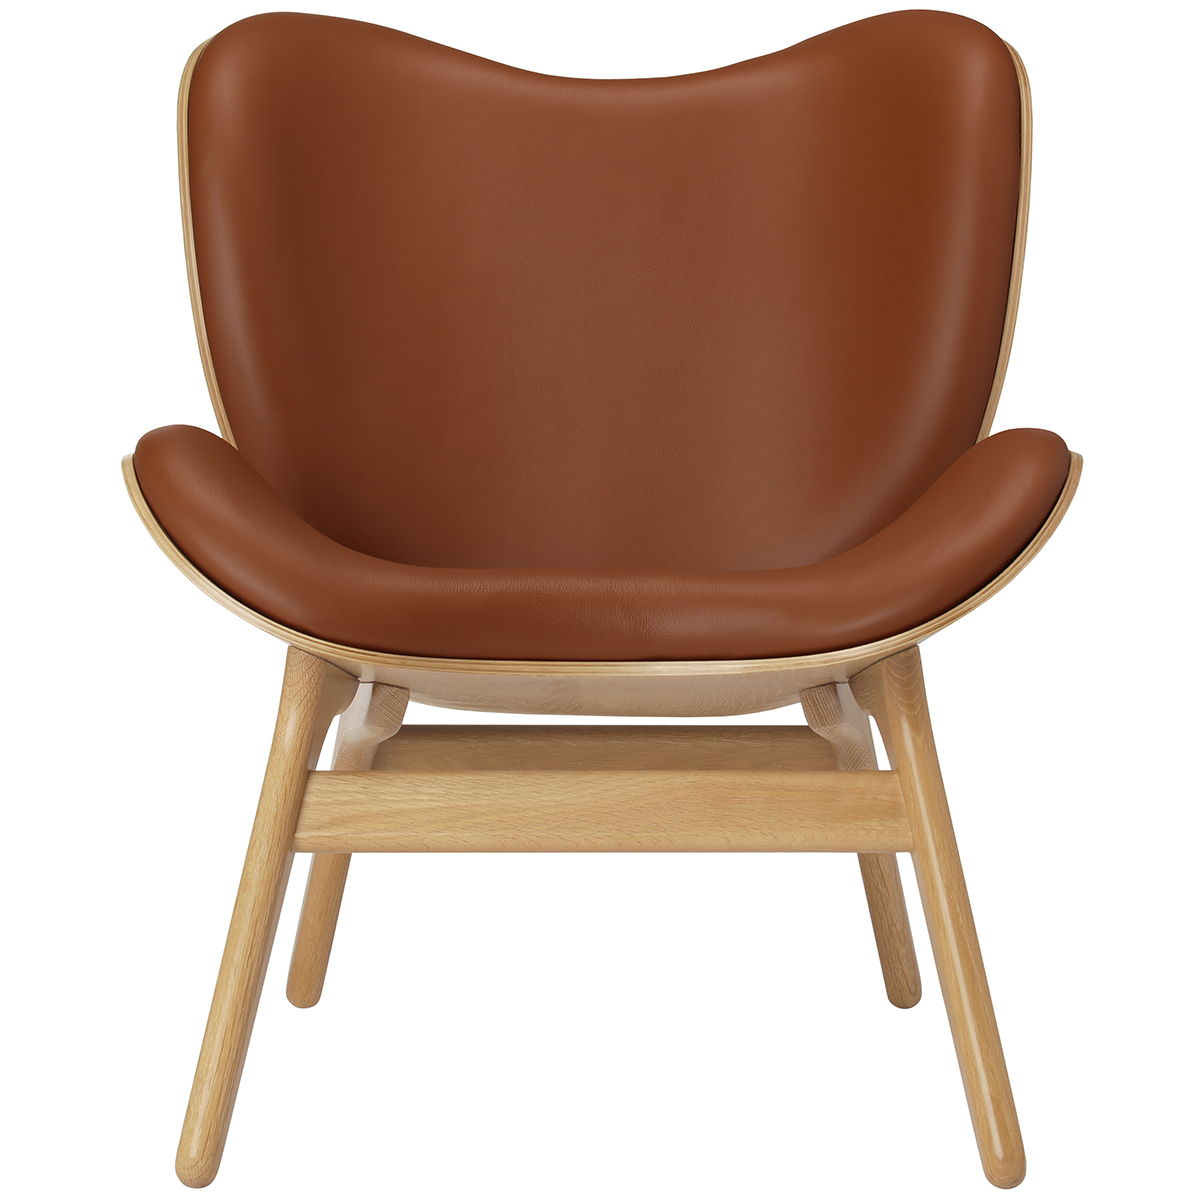 A Conversation Piece Leather Low Lounge Chair